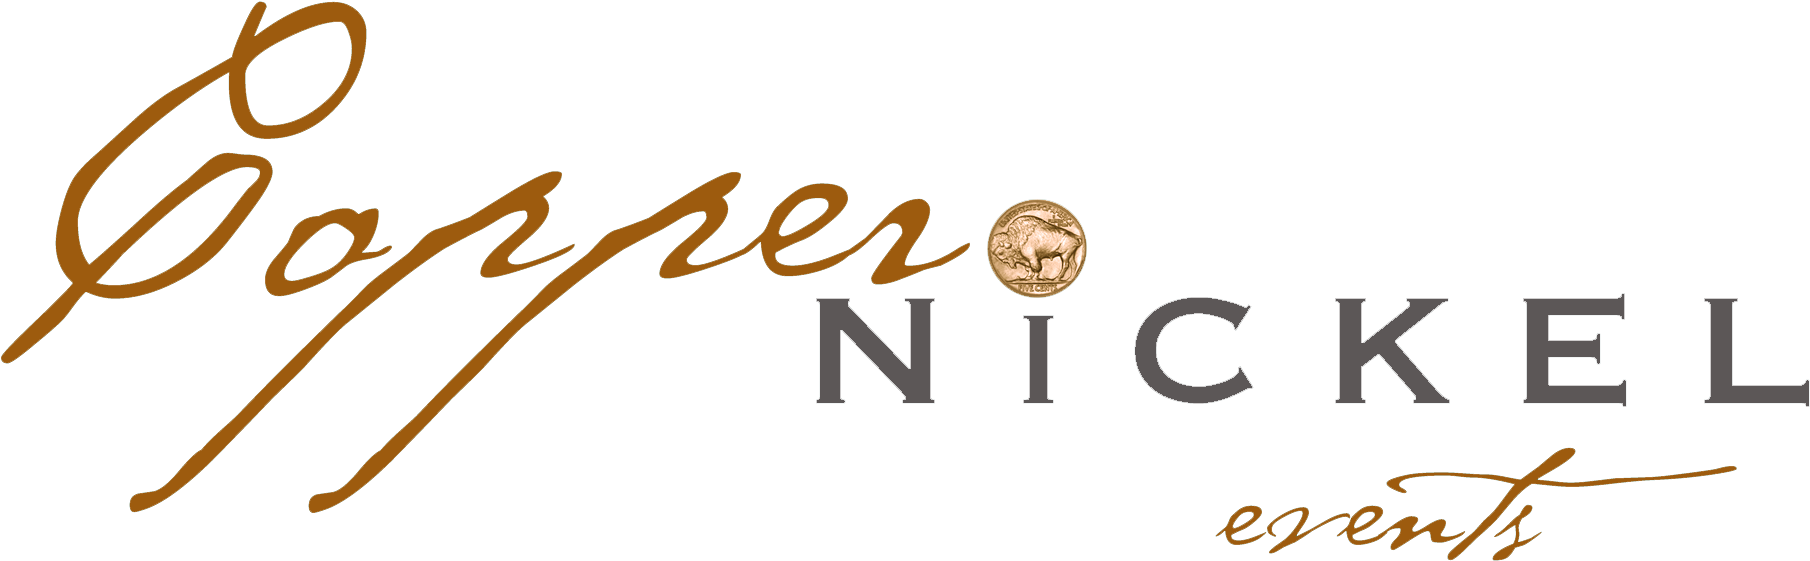 Copper Nickel Events Logo PNG image